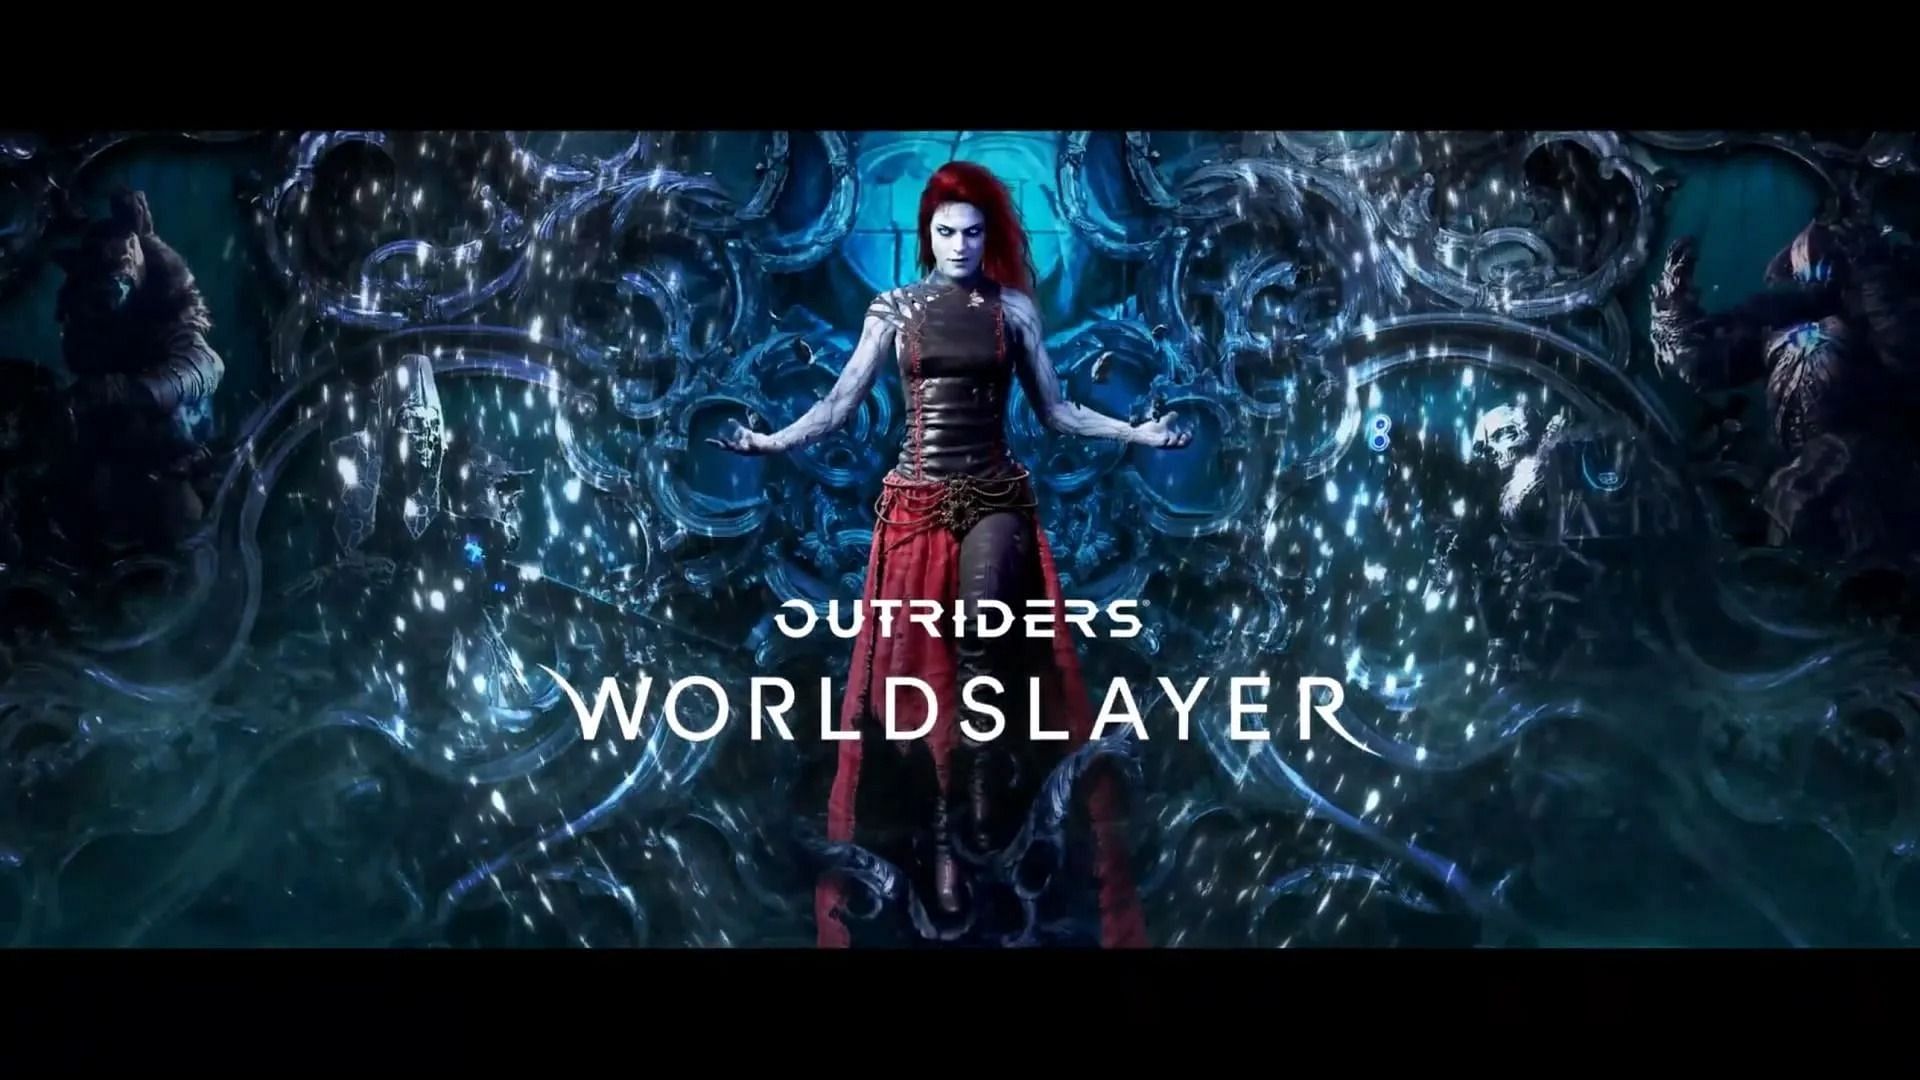 A new trailer dropped for the upcoming Outriders Worldslayer during Summer Game Fest, focused on co-op (Image via Square Enix)